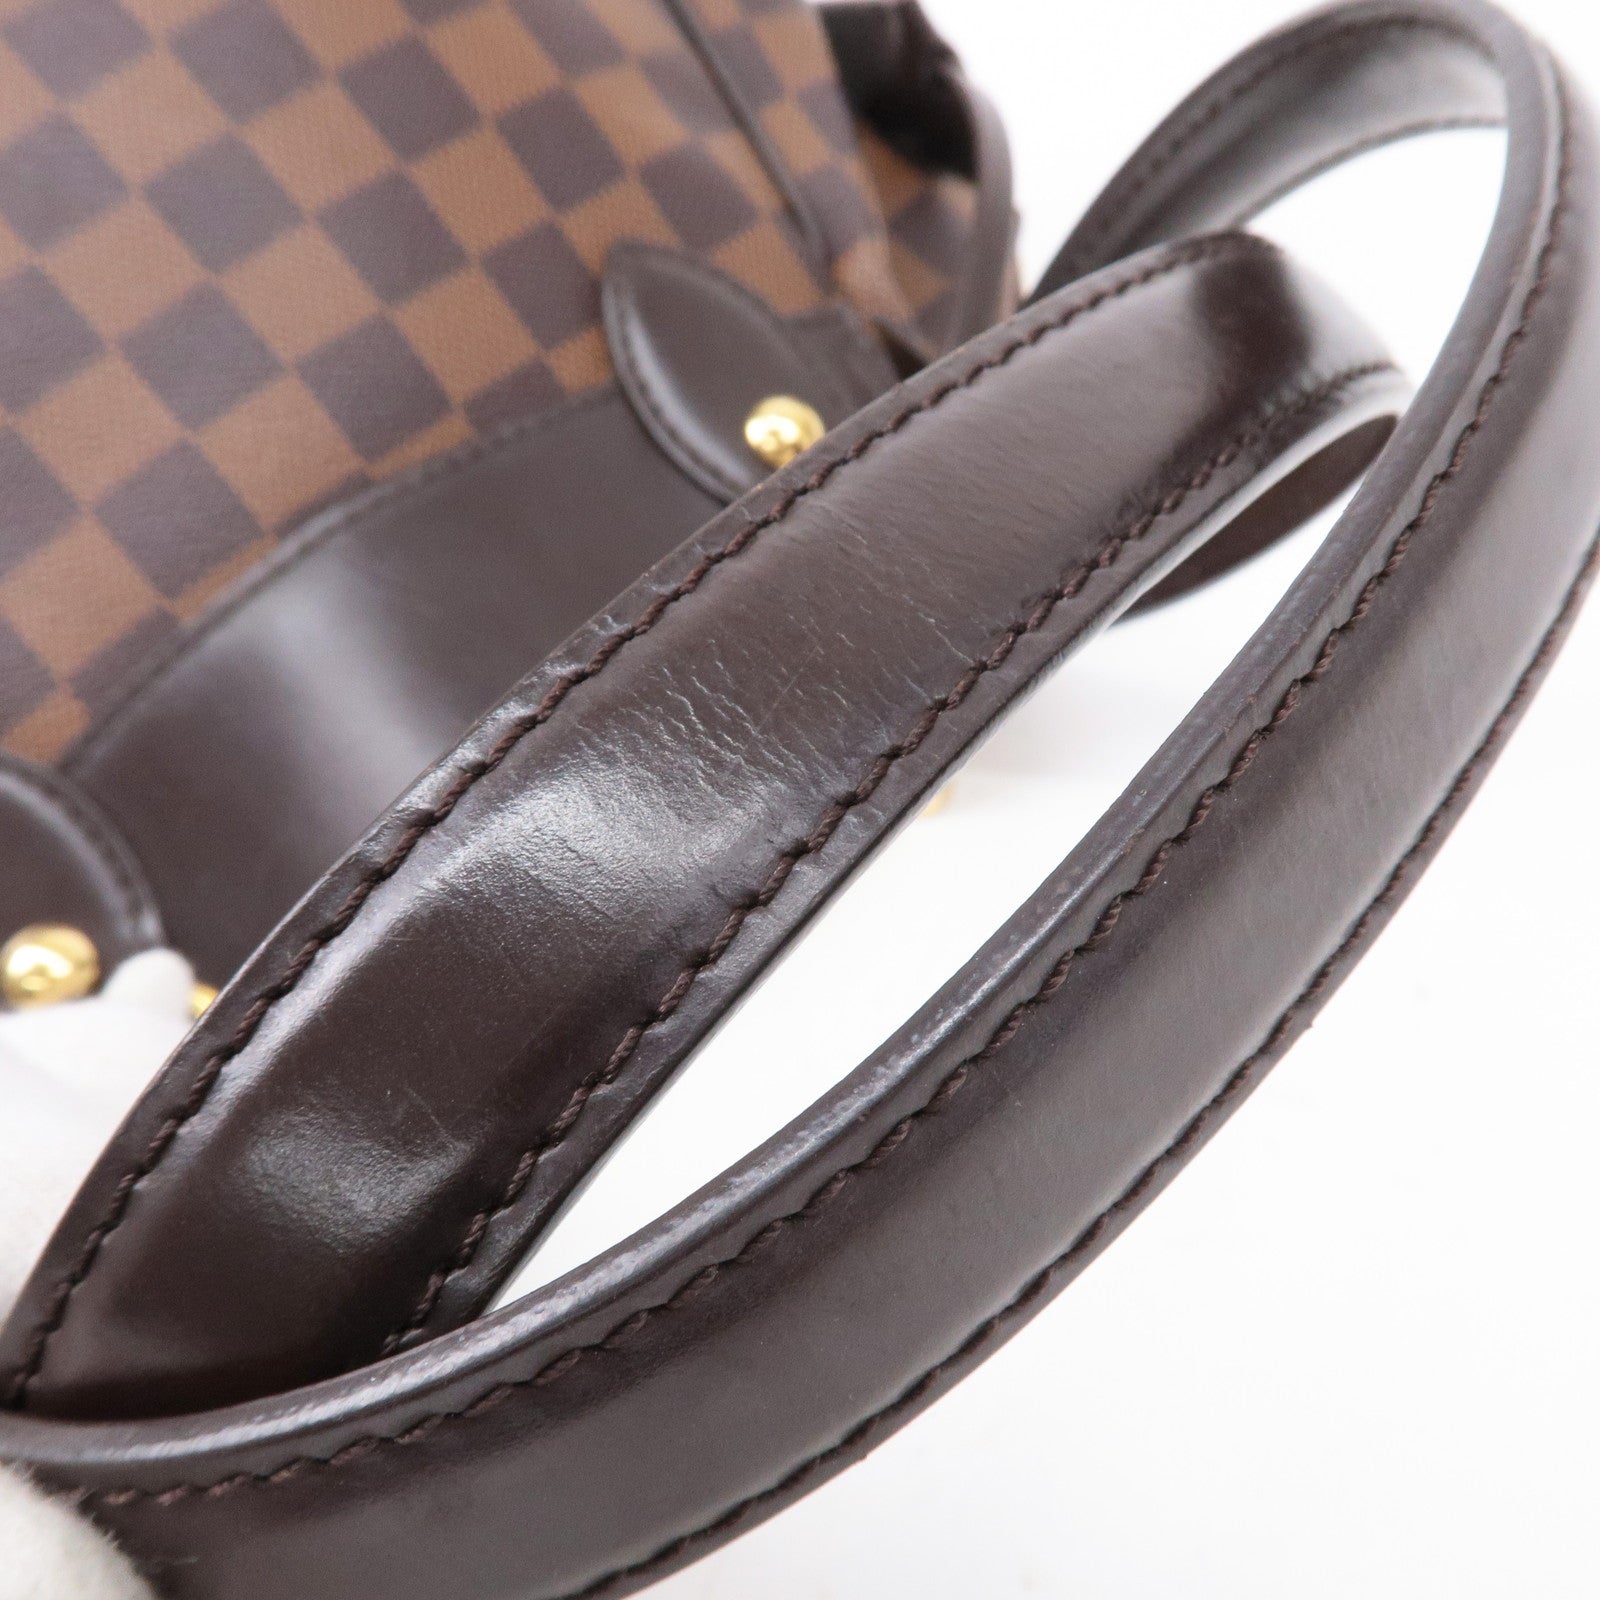 Shop for Louis Vuitton Damier Ebene Canvas Leather Verona PM Bag - Shipped  from USA